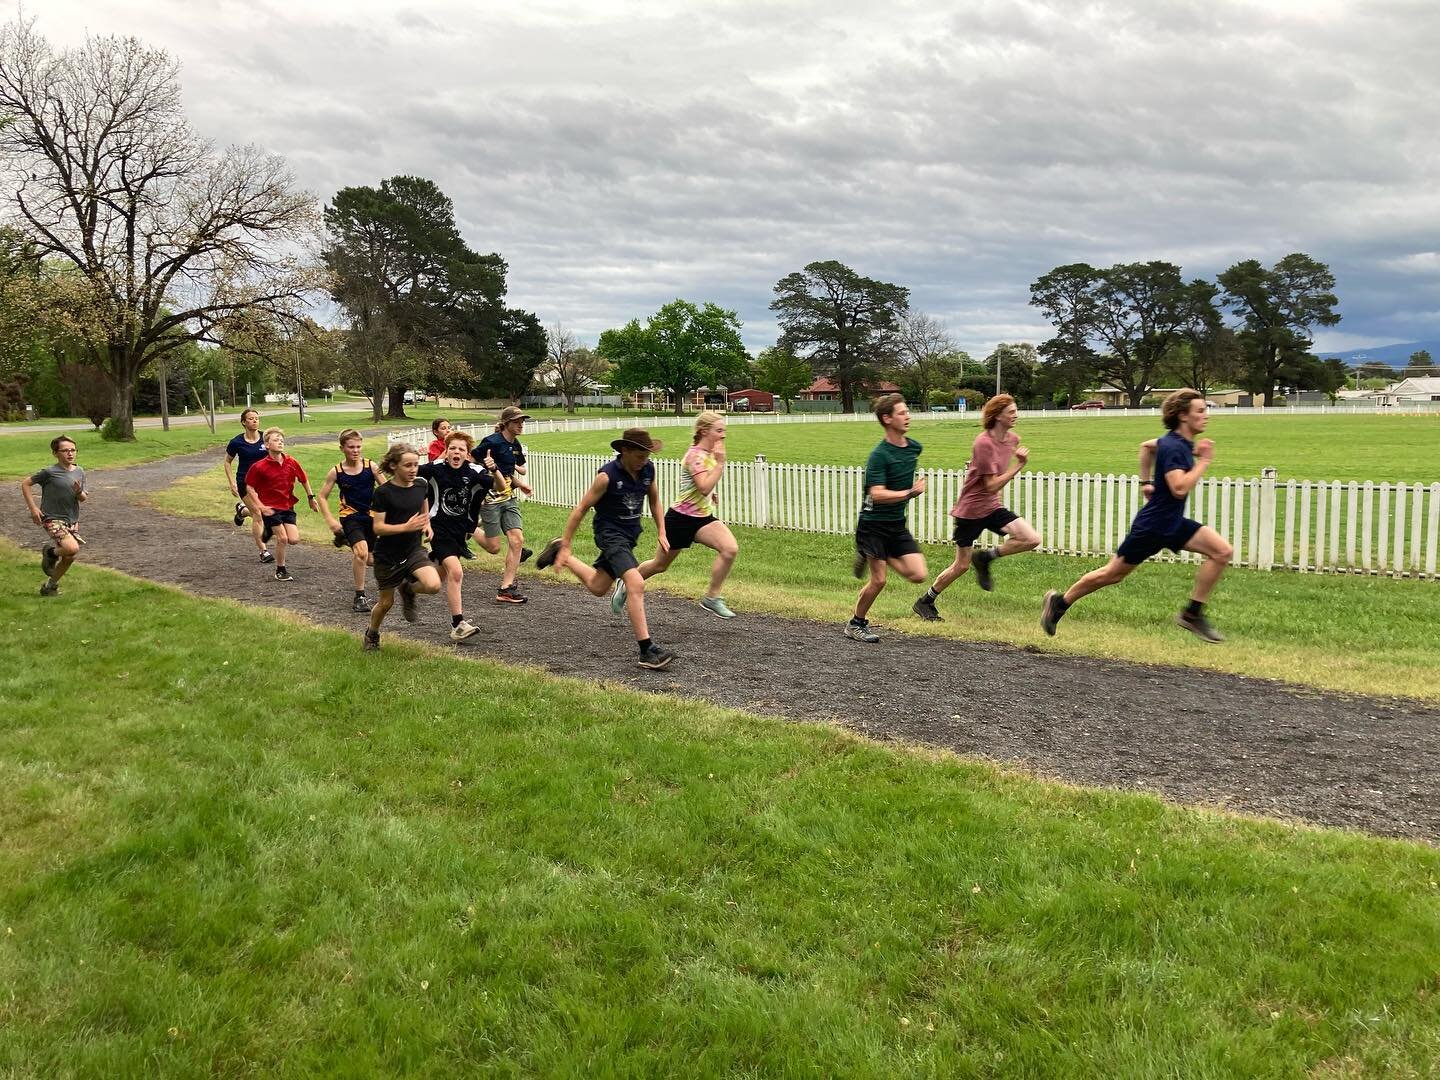 The junior numbers are building nicely as we move out of winter road and cross country to summer athletics.  Congrats to the leader of the pack Judah Kelleher on winning $100 gift voucher from @sub4apparel for a great season. The new Mansfield single